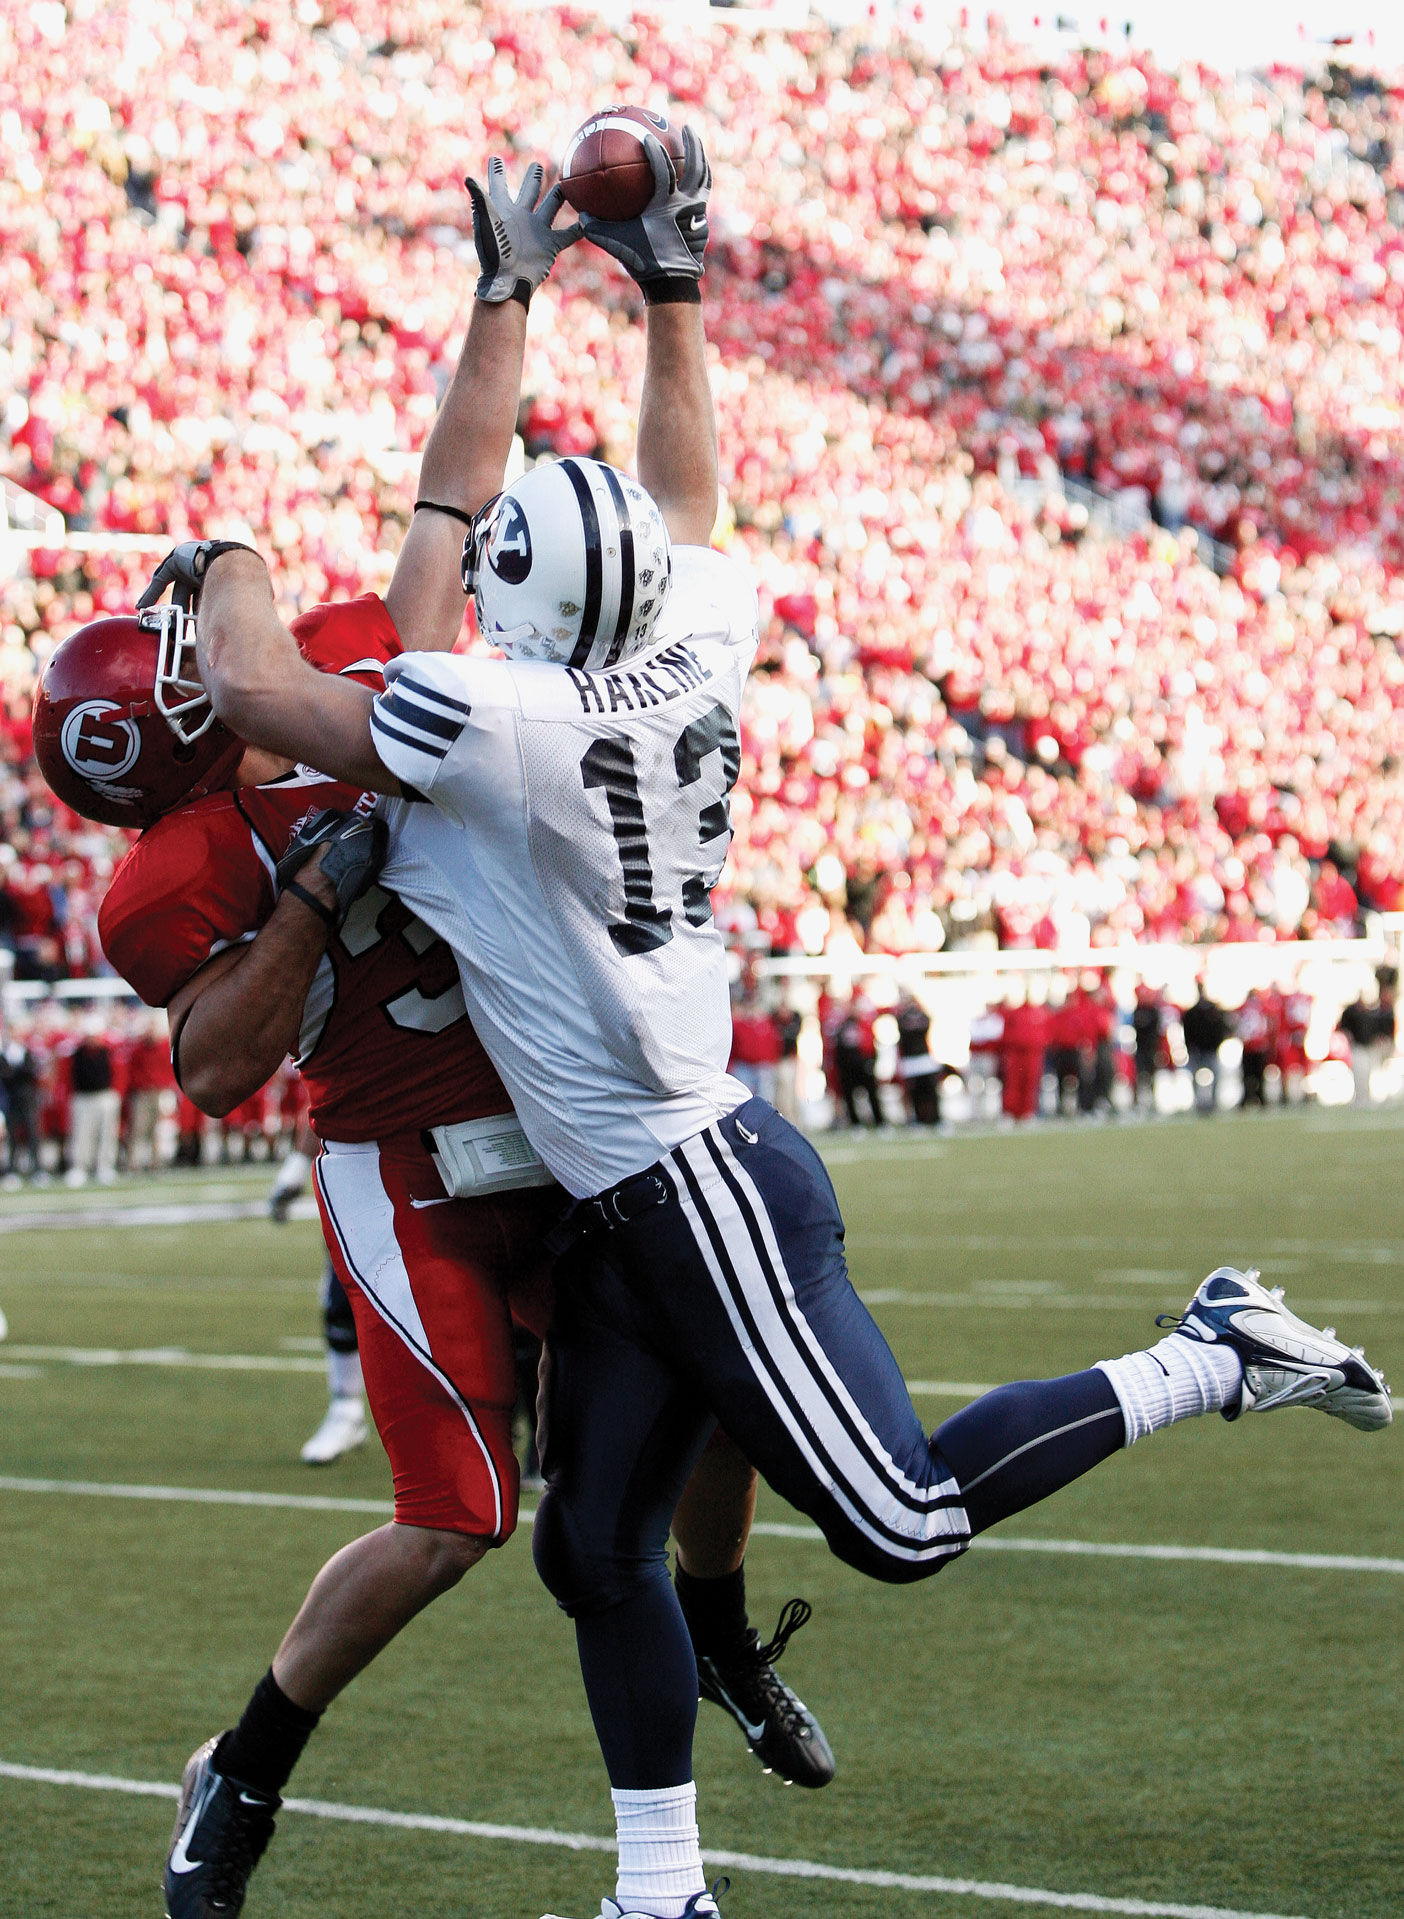 In the 2006 game against Utah, Jonny Harline battles with a defender for one of his three touchdown receptions.